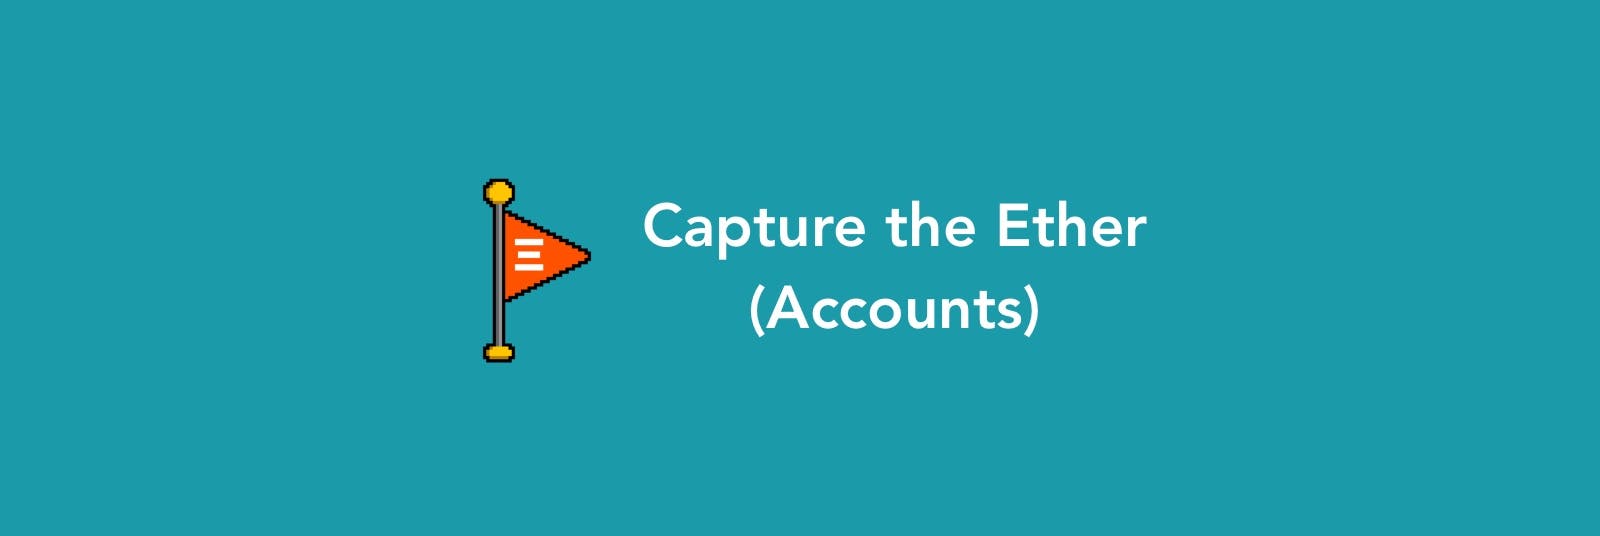 Capture The Ether 题解（Accounts）